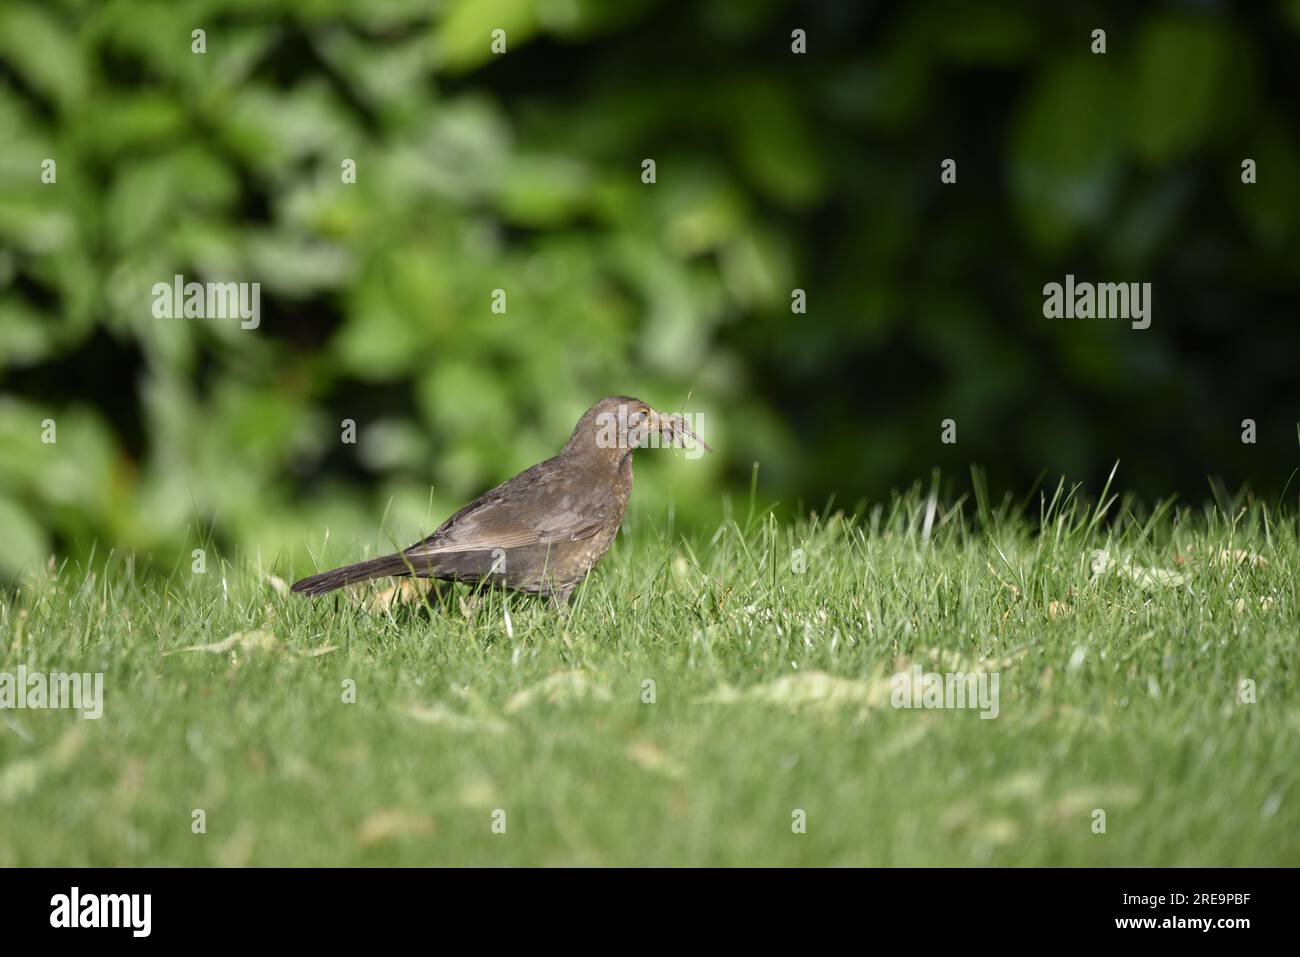 Close-Up, Right-Profile Image of a Common Female Blackbird (Turdus merula) Standing on Short Grass with a Beak Full of Worms, on a Sunny Day in the UK Stock Photo